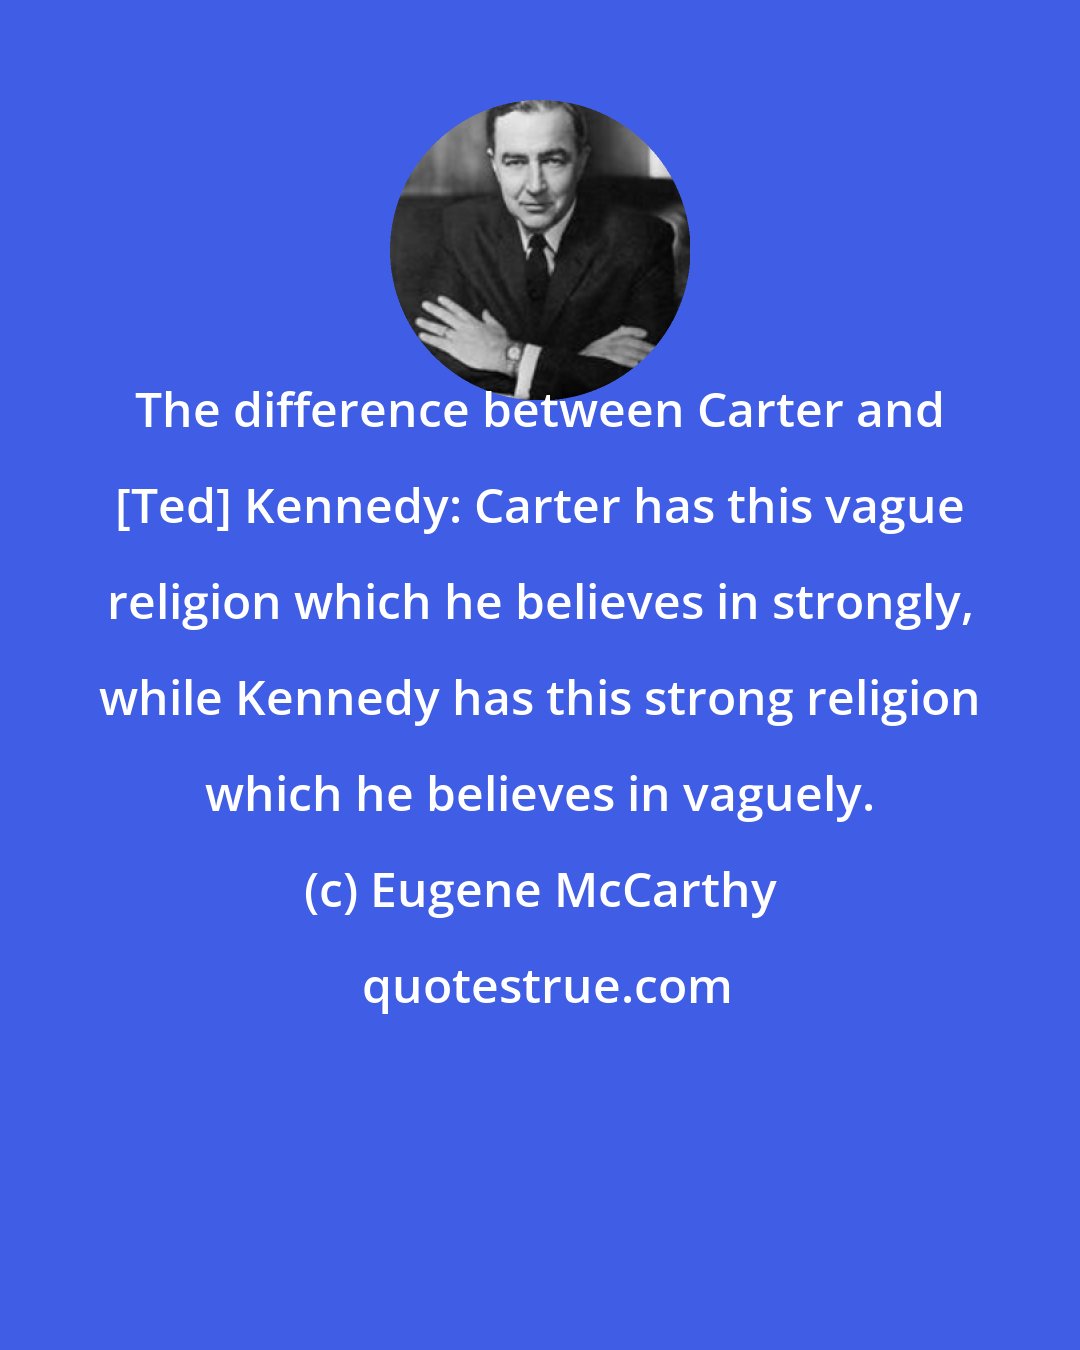 Eugene McCarthy: The difference between Carter and [Ted] Kennedy: Carter has this vague religion which he believes in strongly, while Kennedy has this strong religion which he believes in vaguely.